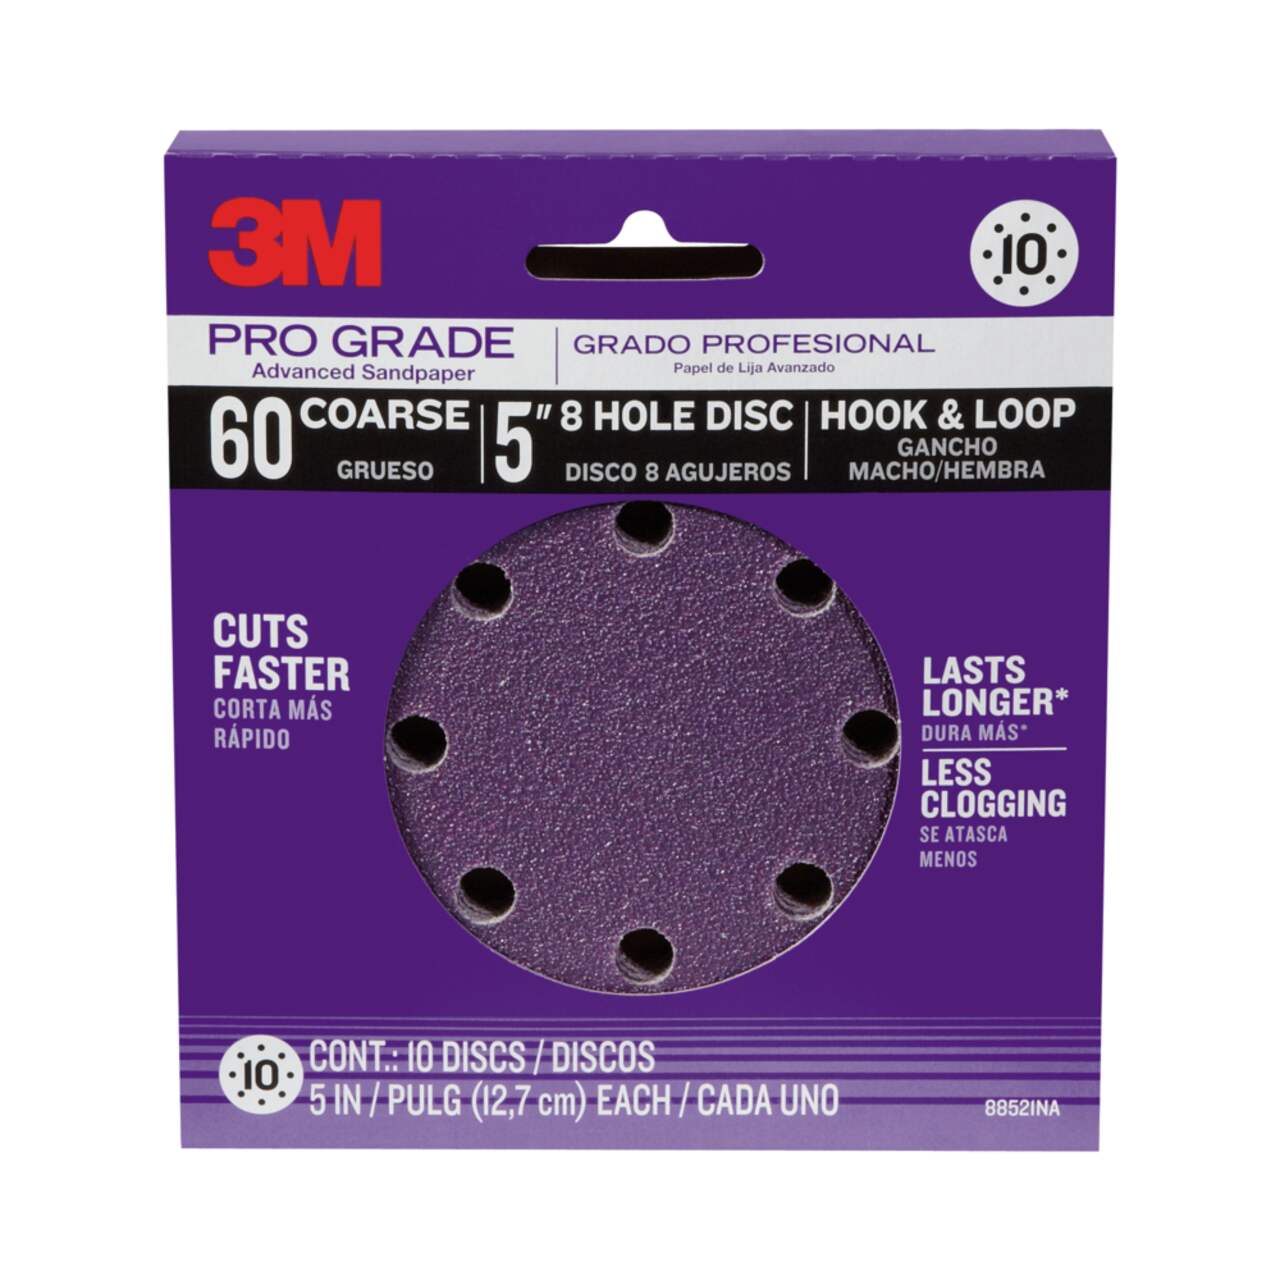 https://media-www.canadiantire.ca/product/fixing/tools/power-tool-accessories/0542428/3m-pro-sanding-disc-60-grit-10-pack-f0bbe515-b5ea-404e-b000-e16921ff1c51.png?imdensity=1&imwidth=640&impolicy=mZoom